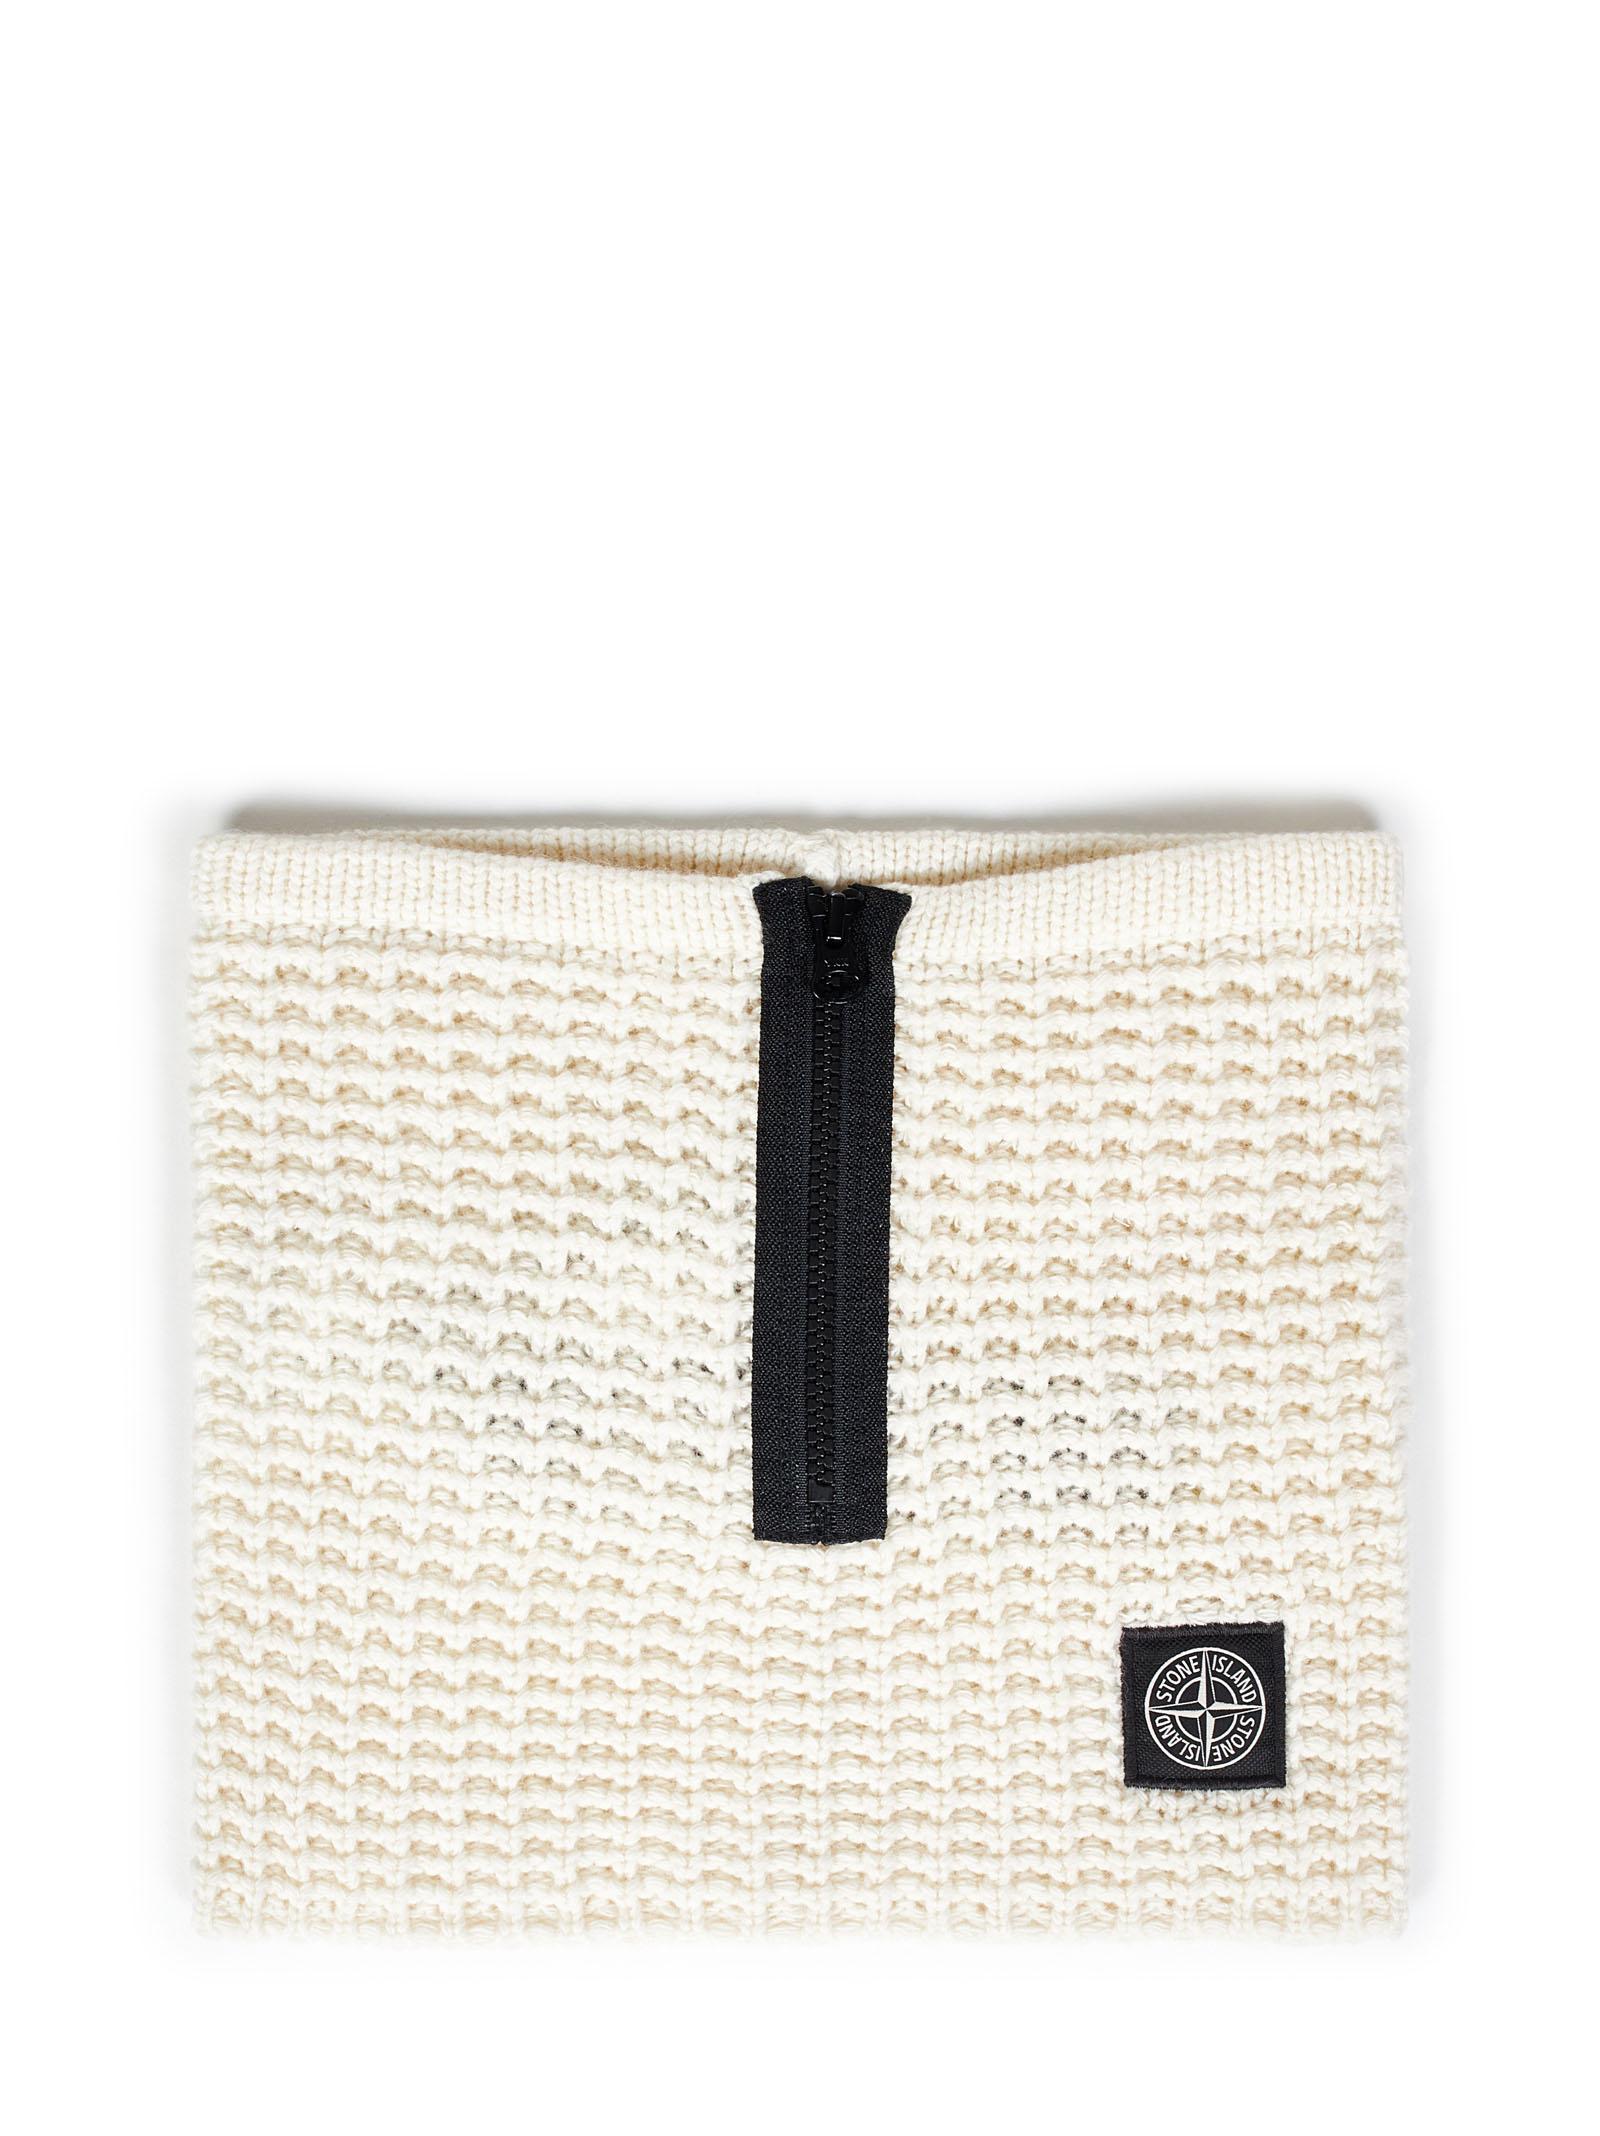 Stone Island Neck Warmer in Natural for Men | Lyst